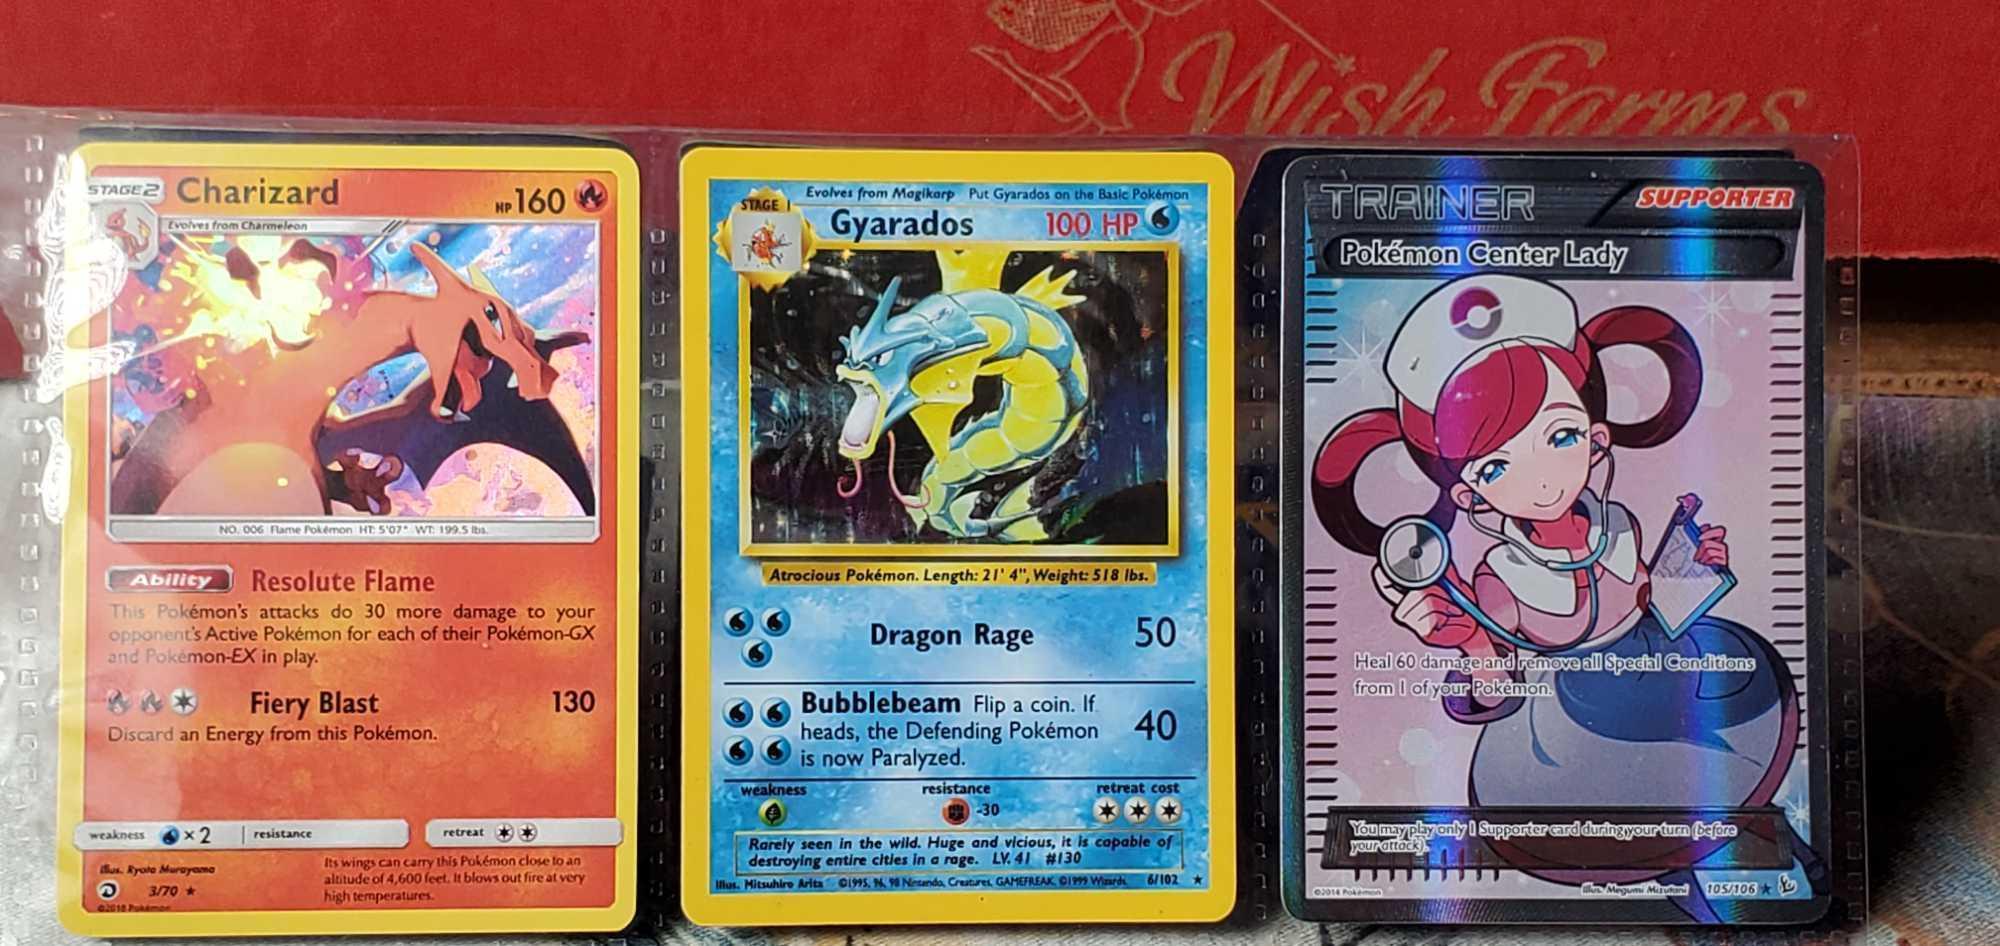 39 First Edition, 2 World Championship Signed, 1 Pocket Monster Card, and 34 Pokemon Marbles